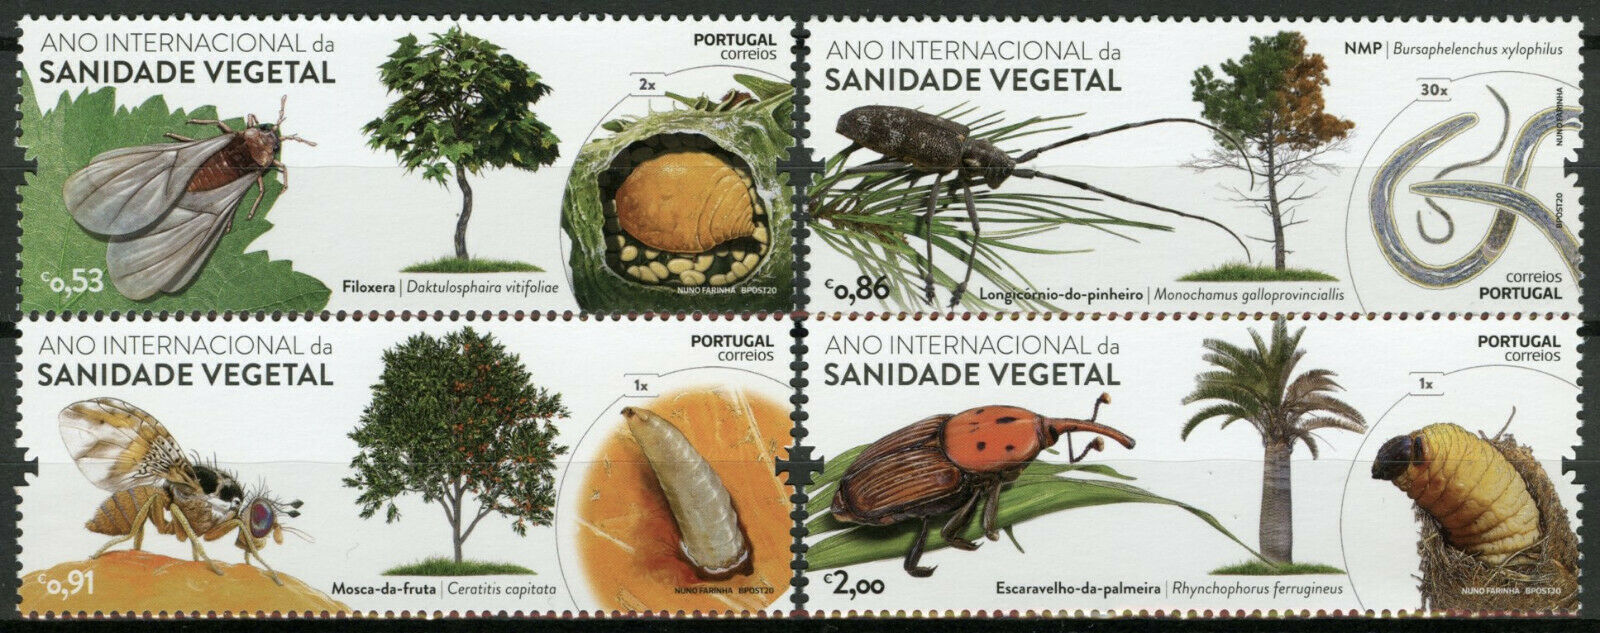 Portugal Trees Stamps 2020 MNH Intl Year of Plant Health Insects Bugs 4v Set